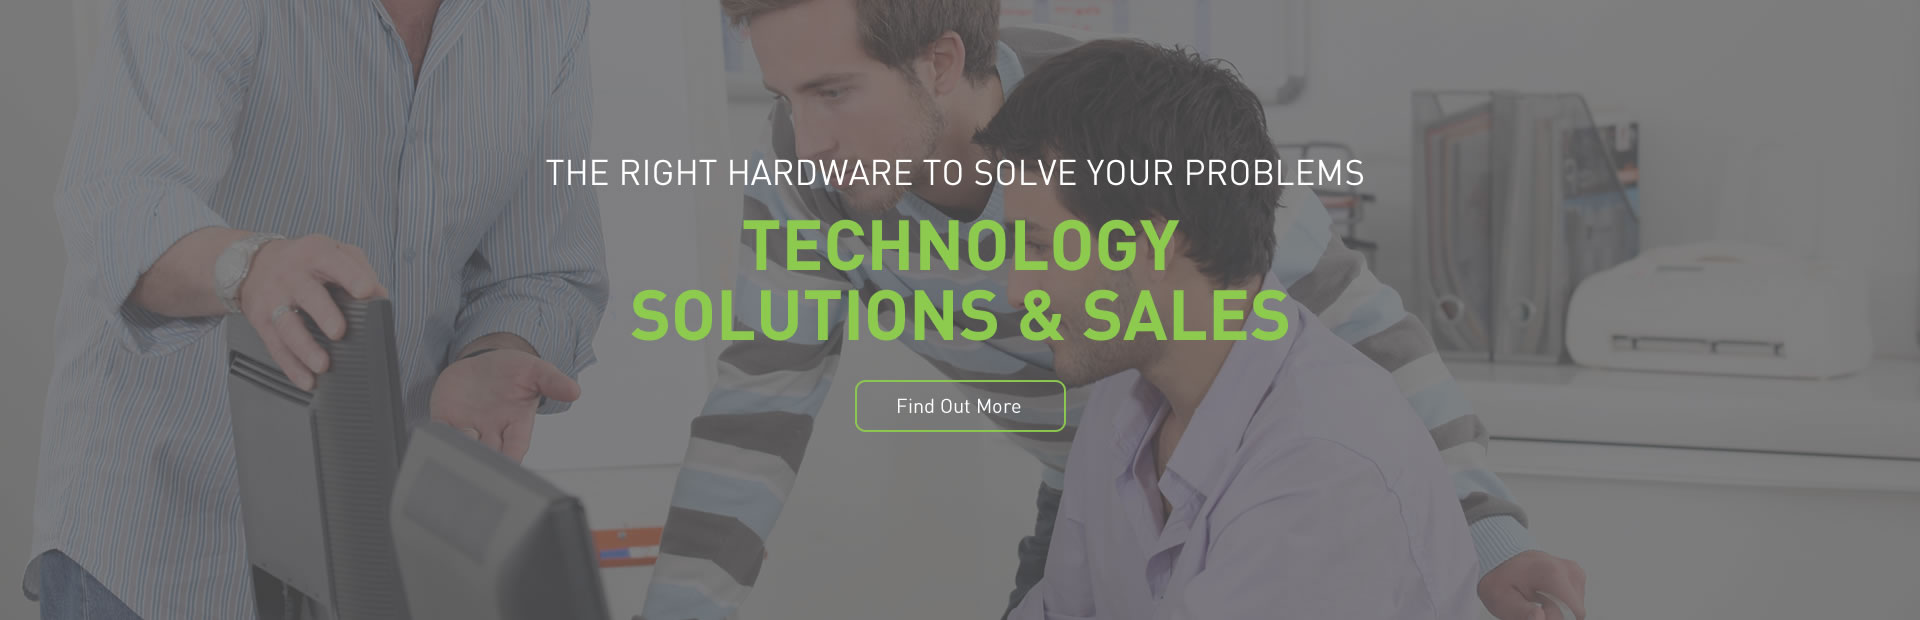 Technology solutions & sales